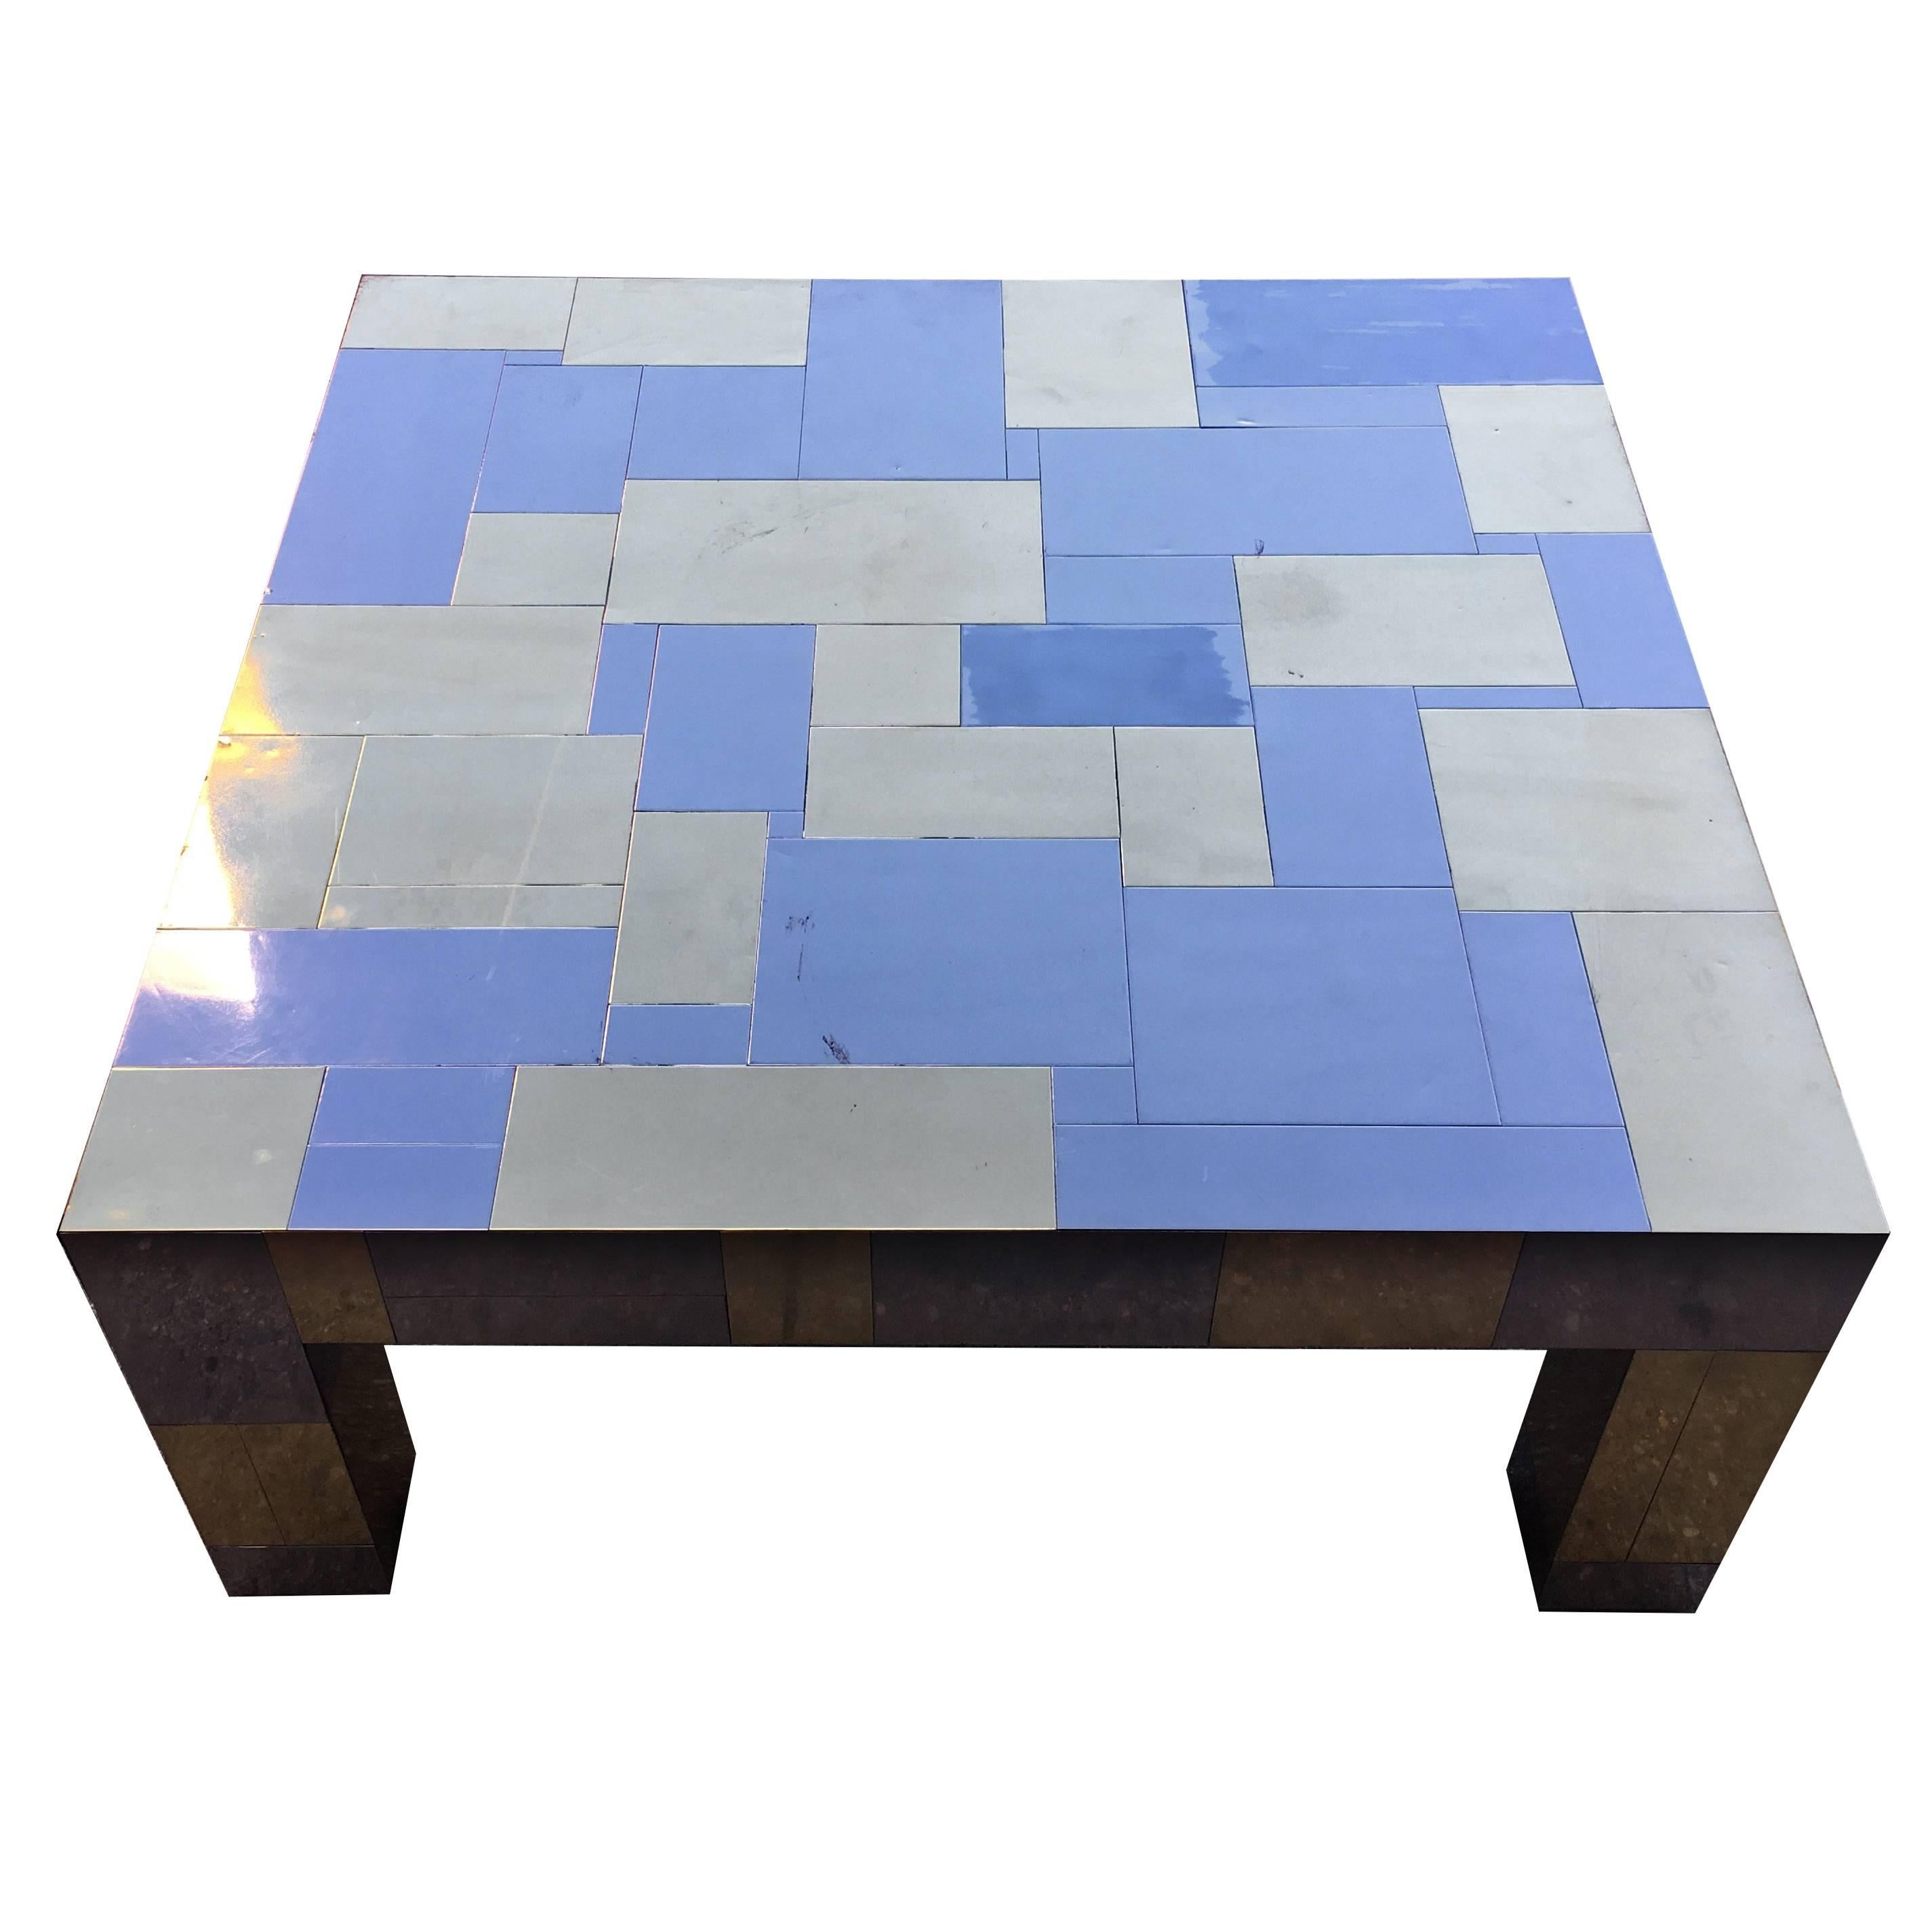 Paul Evans cityscape coffee table for Directional. Patchwork tiles. In good condition with normal surface wear.